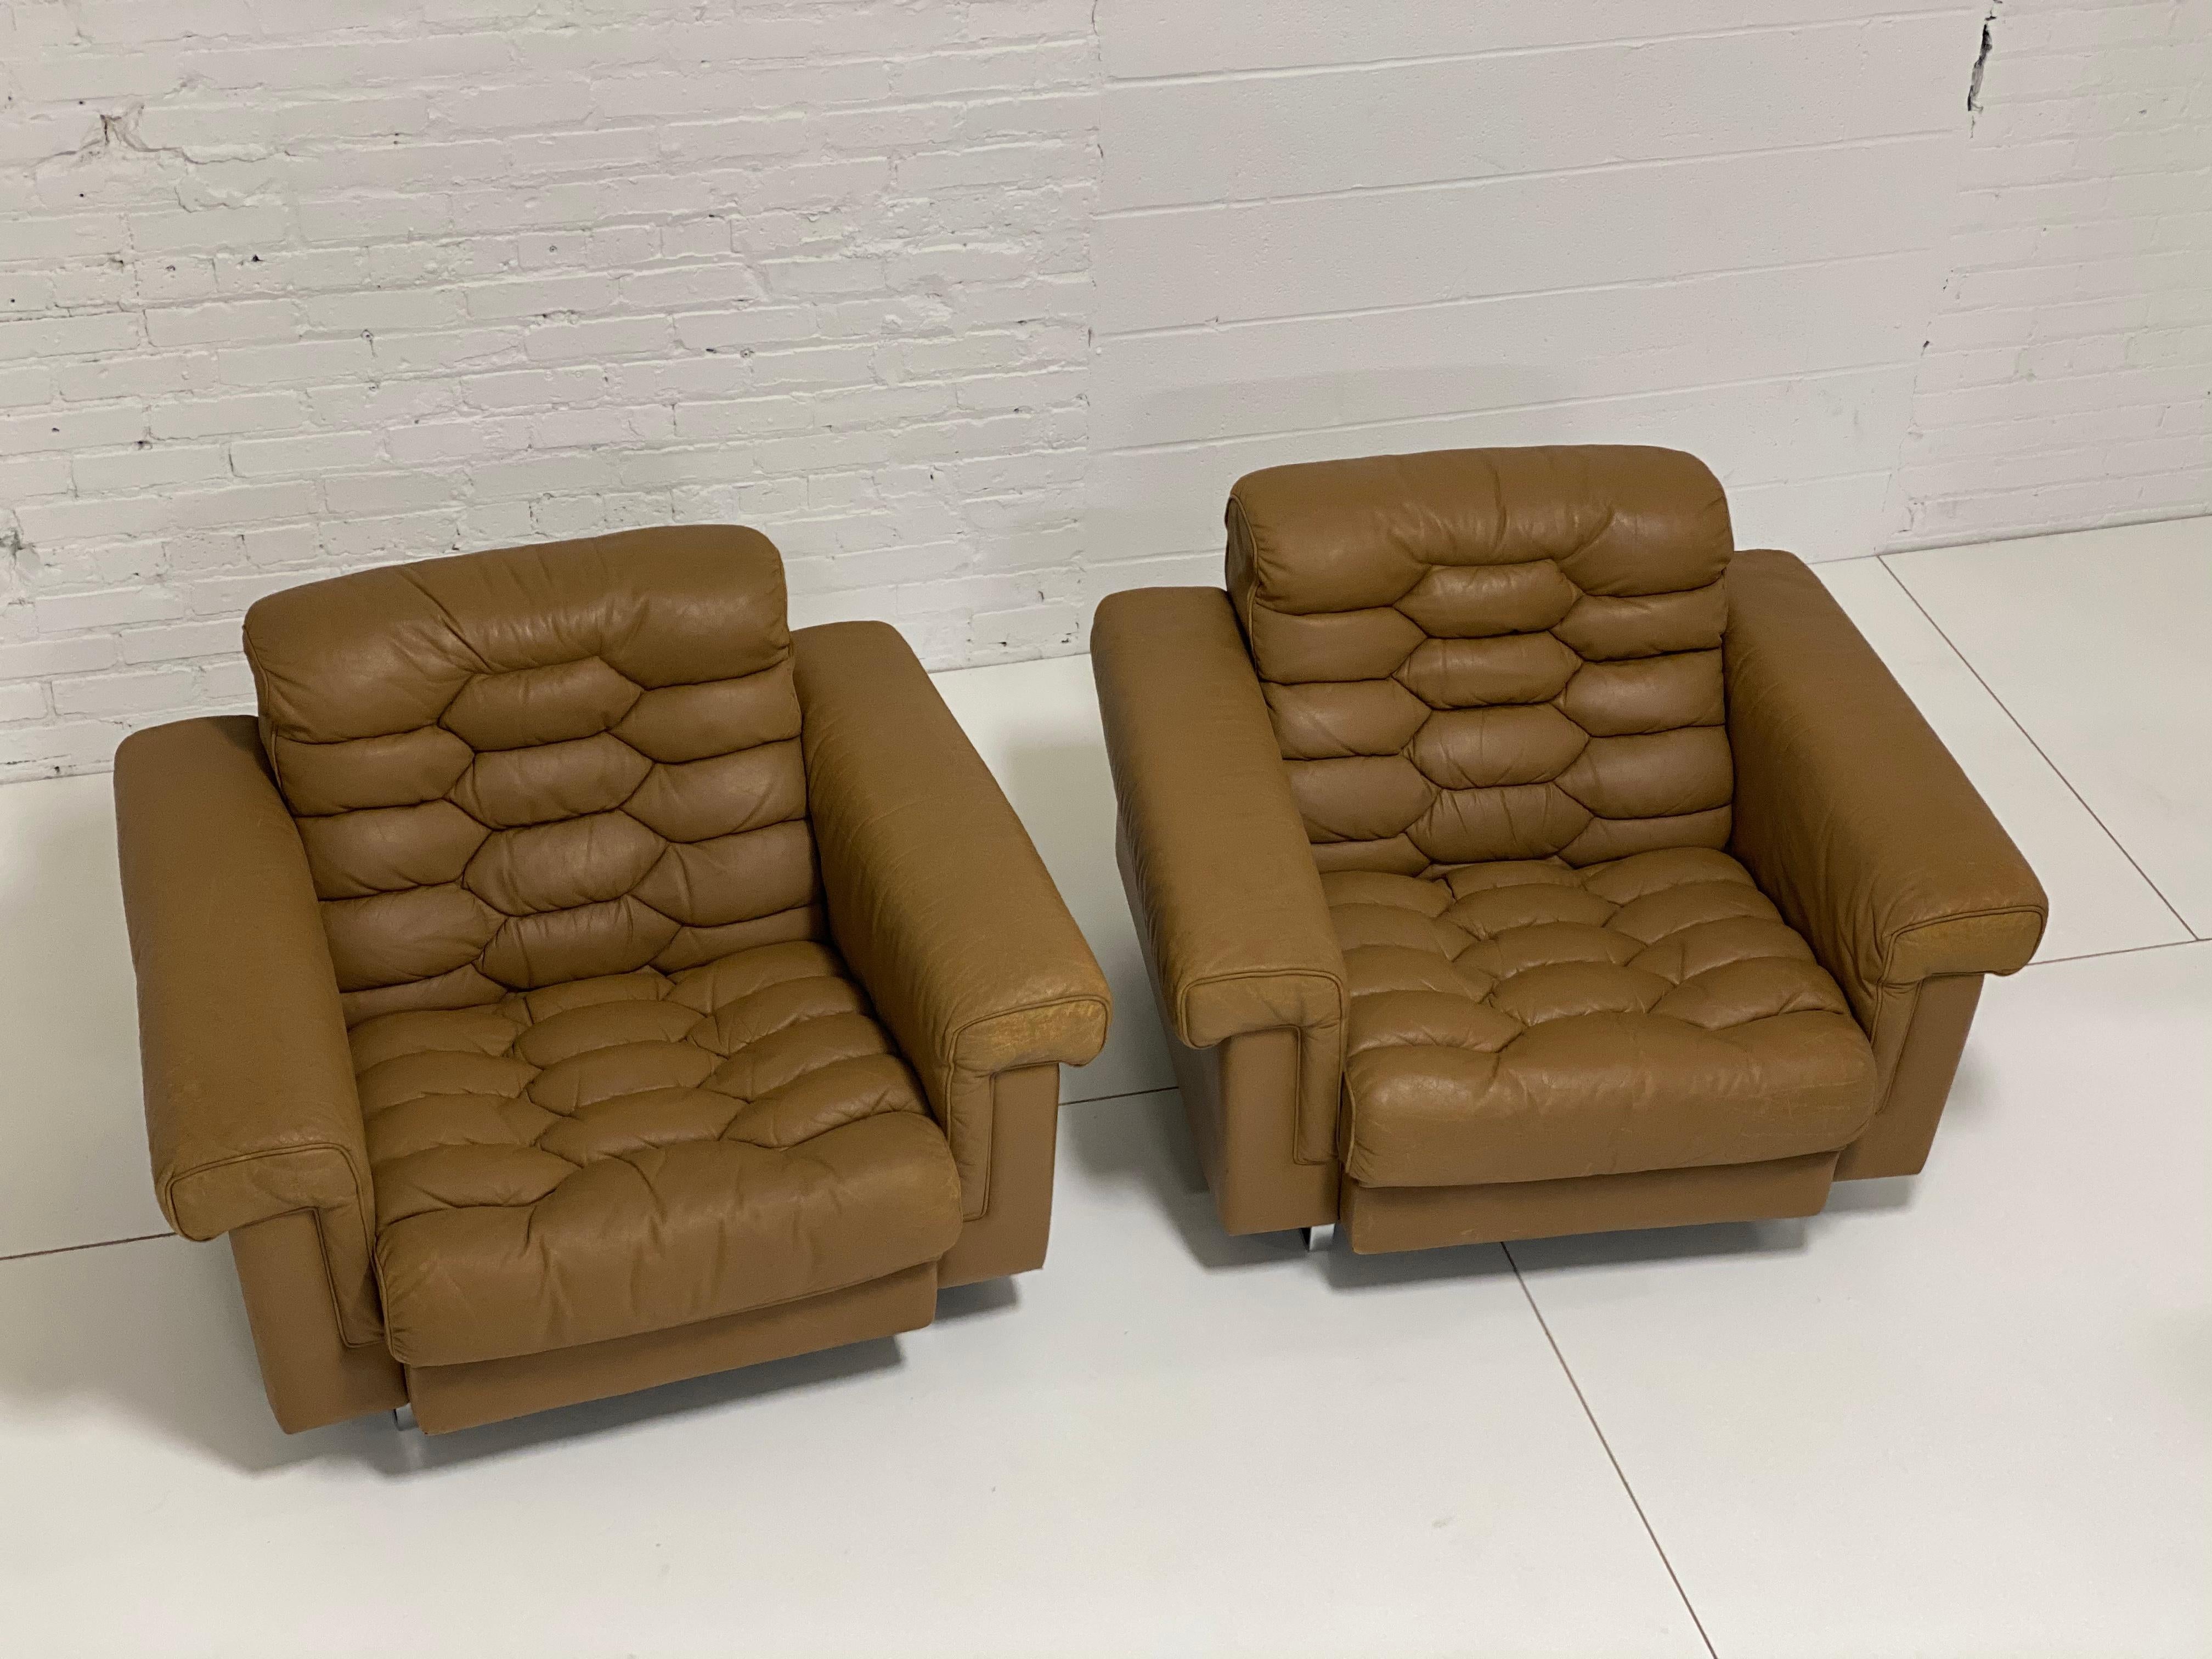 Pair of leather lounge chairs with honeycomb patterned tufting, Switzerland, 1970s. Made by De Sede using some of the finest leather available. Seat and back are adjustable, extending forward into reclining position.

  